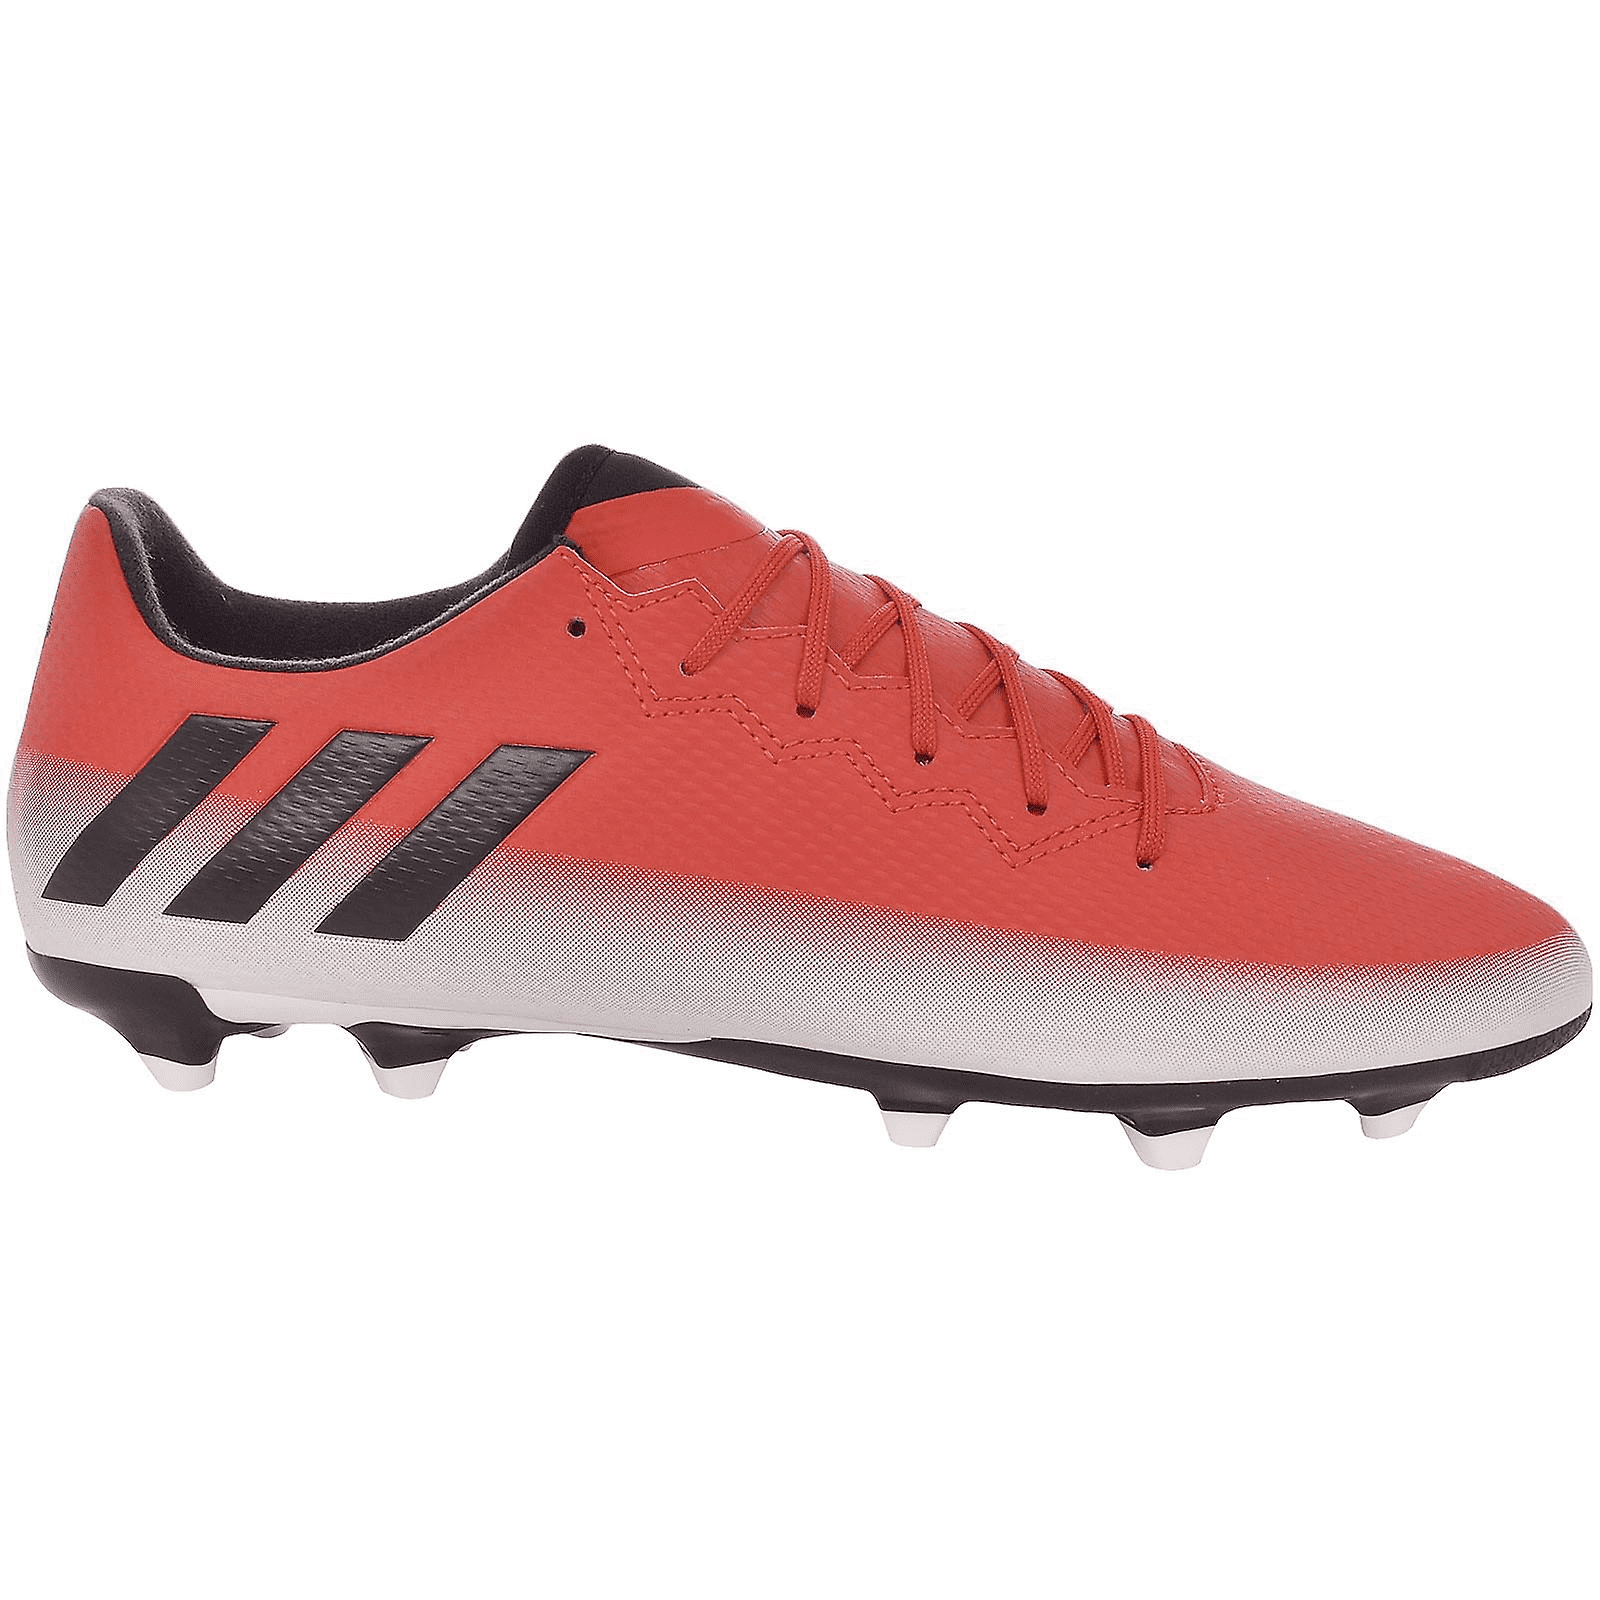 Adidas Messi Football Boot Red/Black